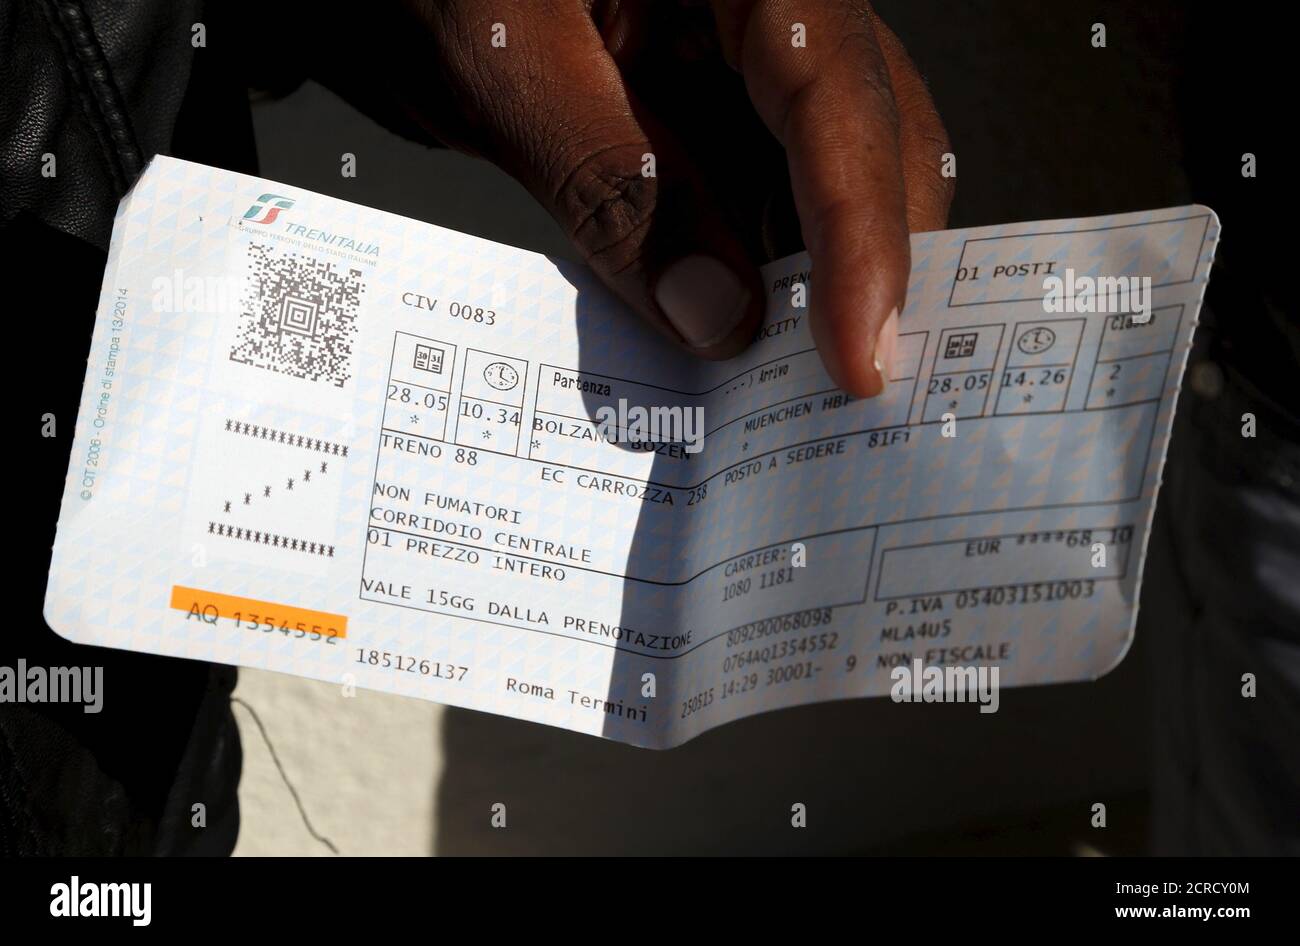 A migrant shows his train ticket to Germany, as he waits to take the train from the Italian border at Bolzano railway station, Italy May 28, 2015. EU asylum rules, known as the Dublin Regulation, were first drafted in the early 1990s and require people seeking refuge to do so in the European country where they first set foot. Northern European countries defend the policy as a way to prevent multiple applications across the continent. Some are upset with what they see as Italy's lax attitude to registering asylum seekers. Earlier this year, French police stopped about 1,000 migrants near the bo Stock Photo